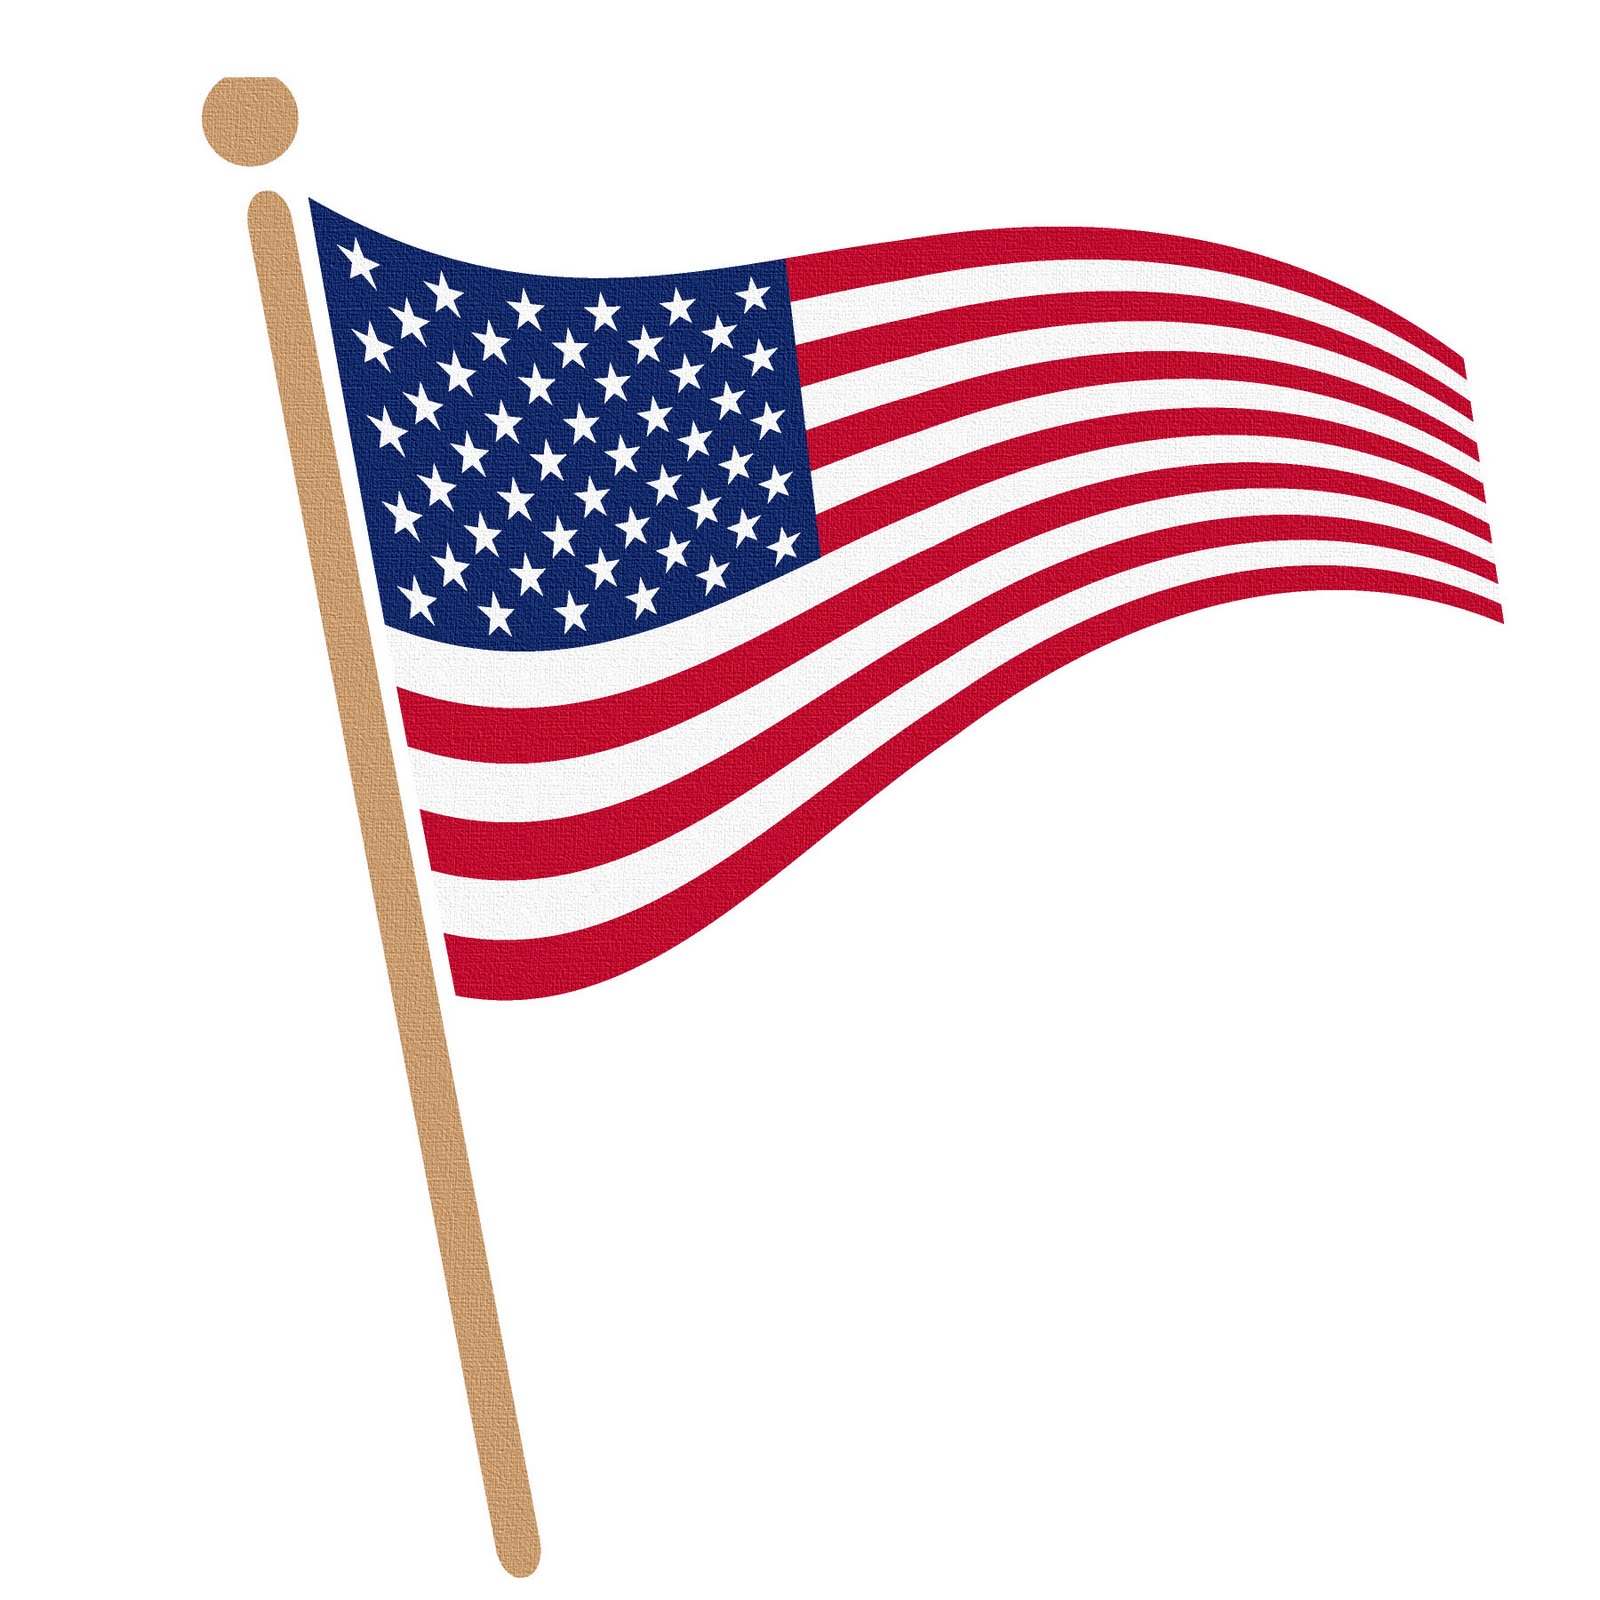 Flowing american flag clipart